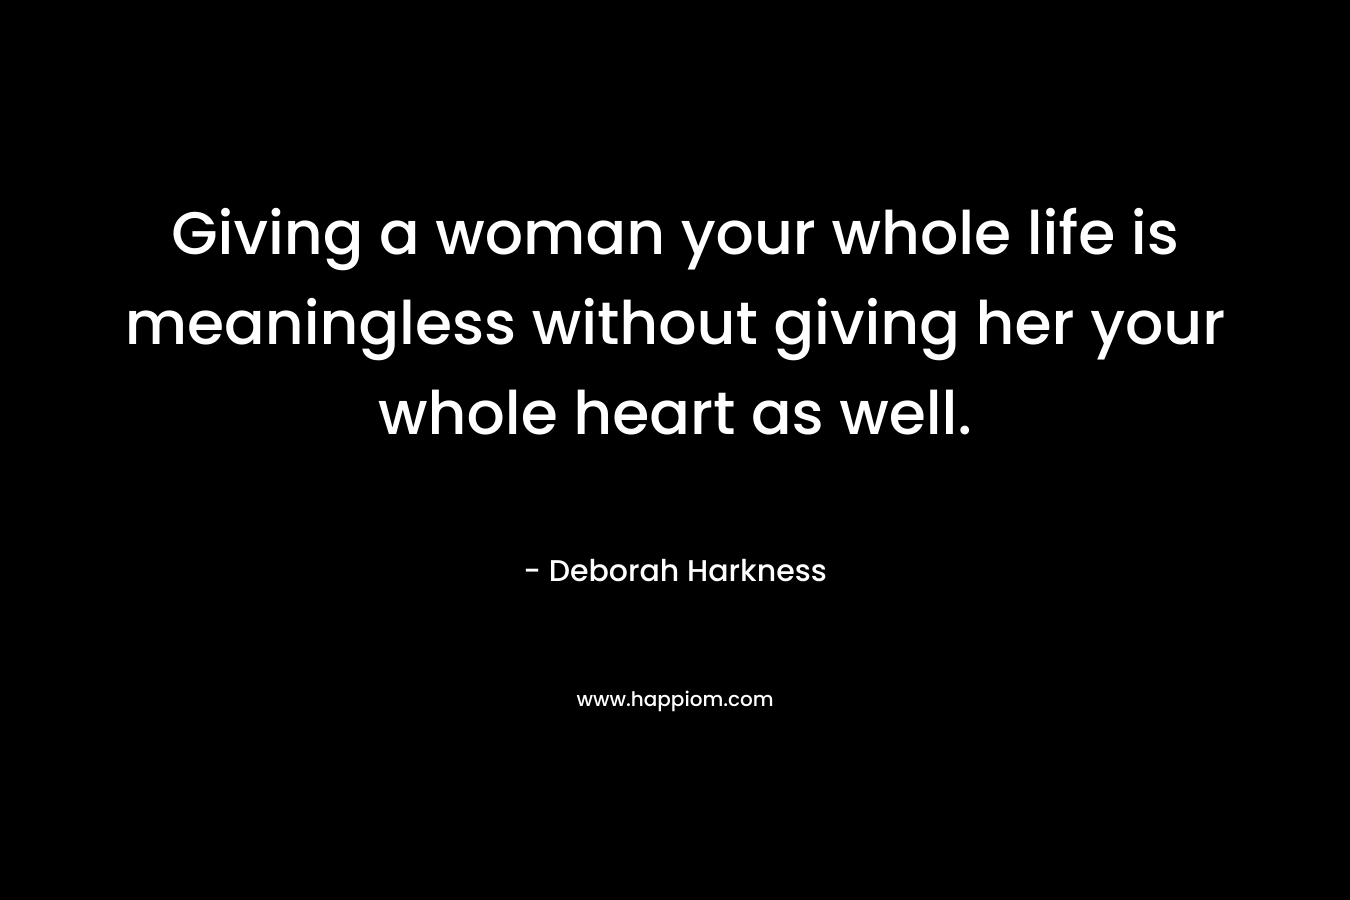 Giving a woman your whole life is meaningless without giving her your whole heart as well. – Deborah Harkness